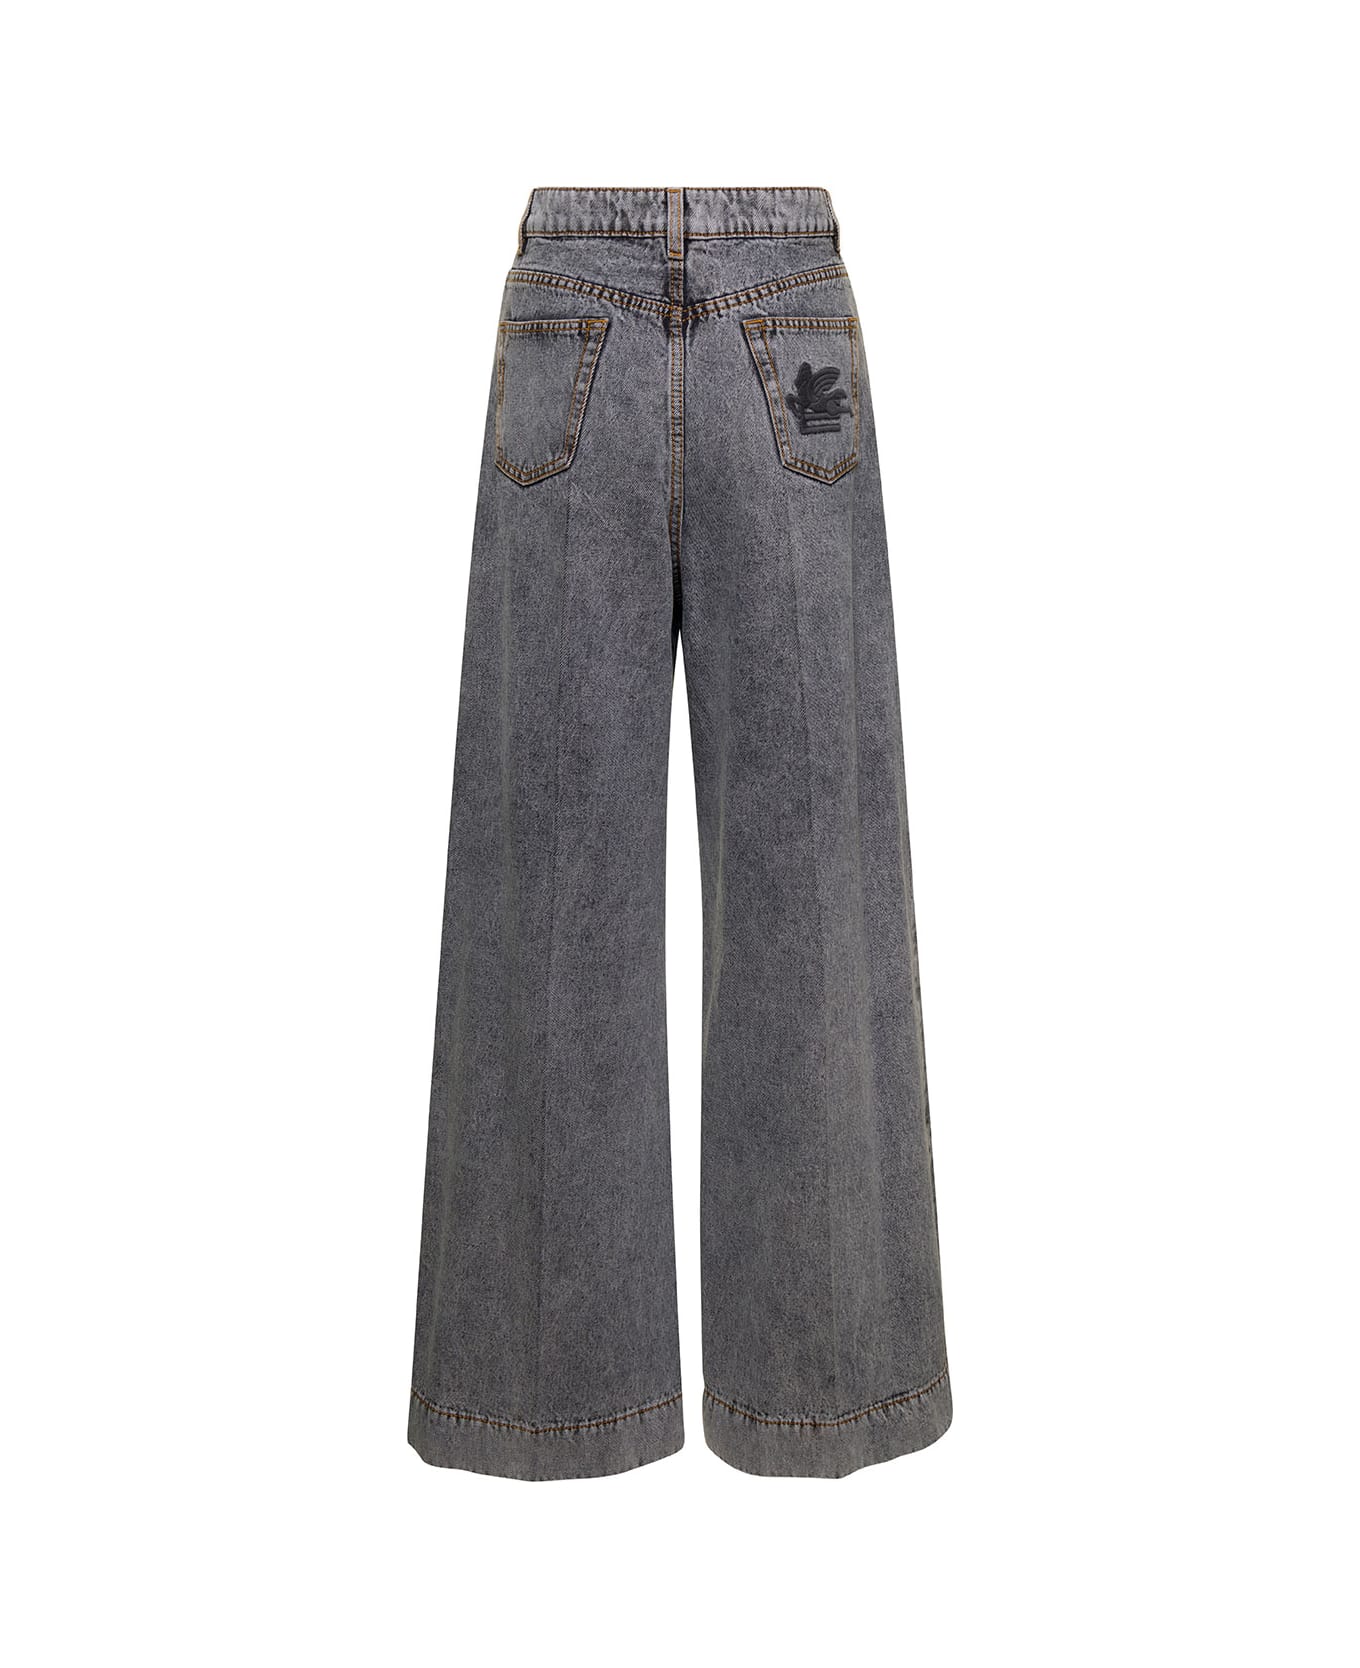 Etro Grey Bootcut Jeans With Pagasus Patch In Cotton Denim Woman - Grey